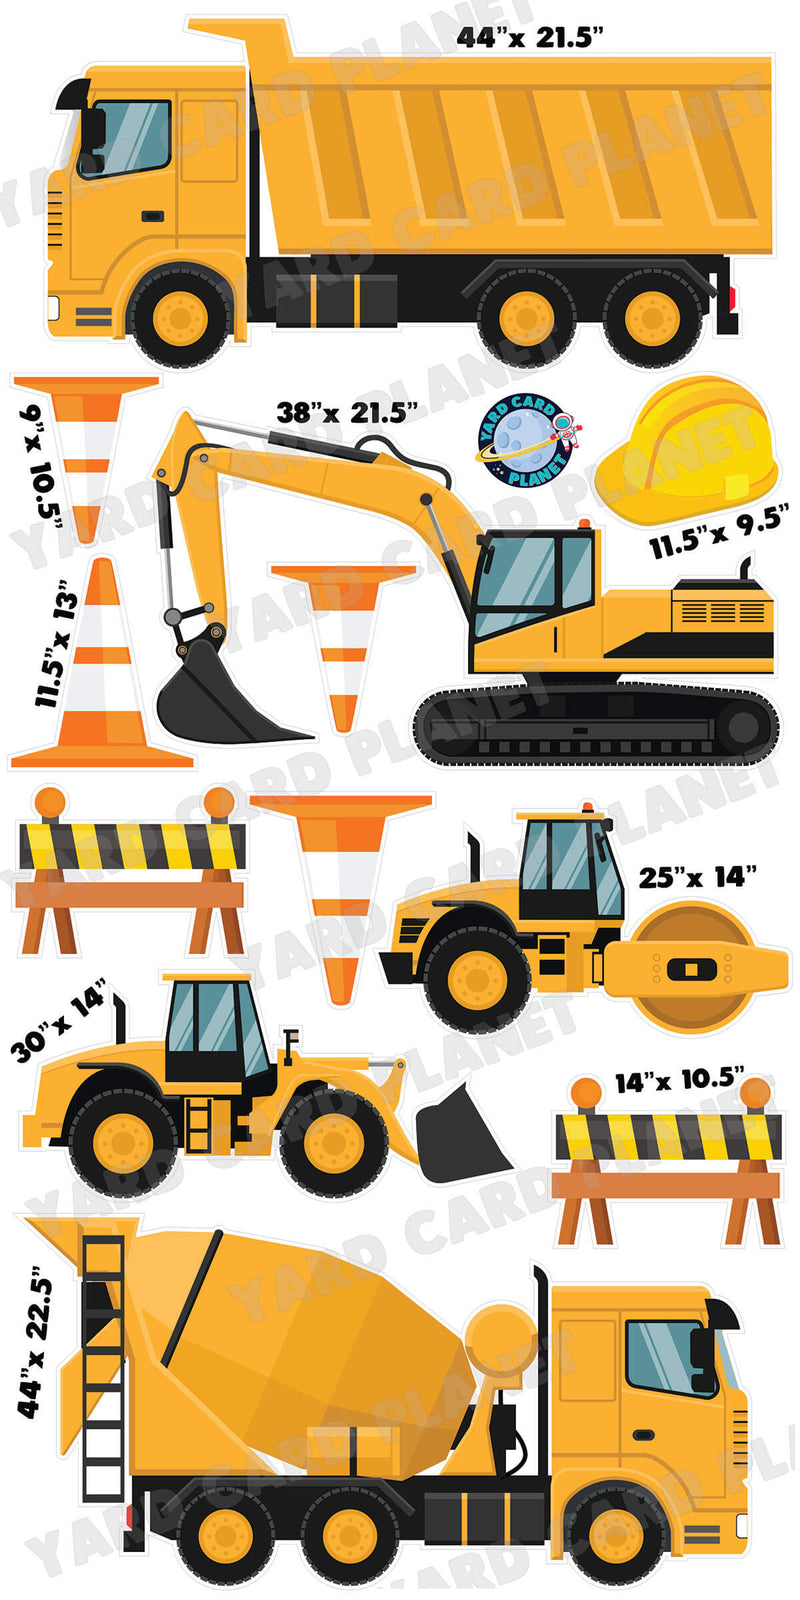 Construction Trucks Yard Card Flair Set with Measurements